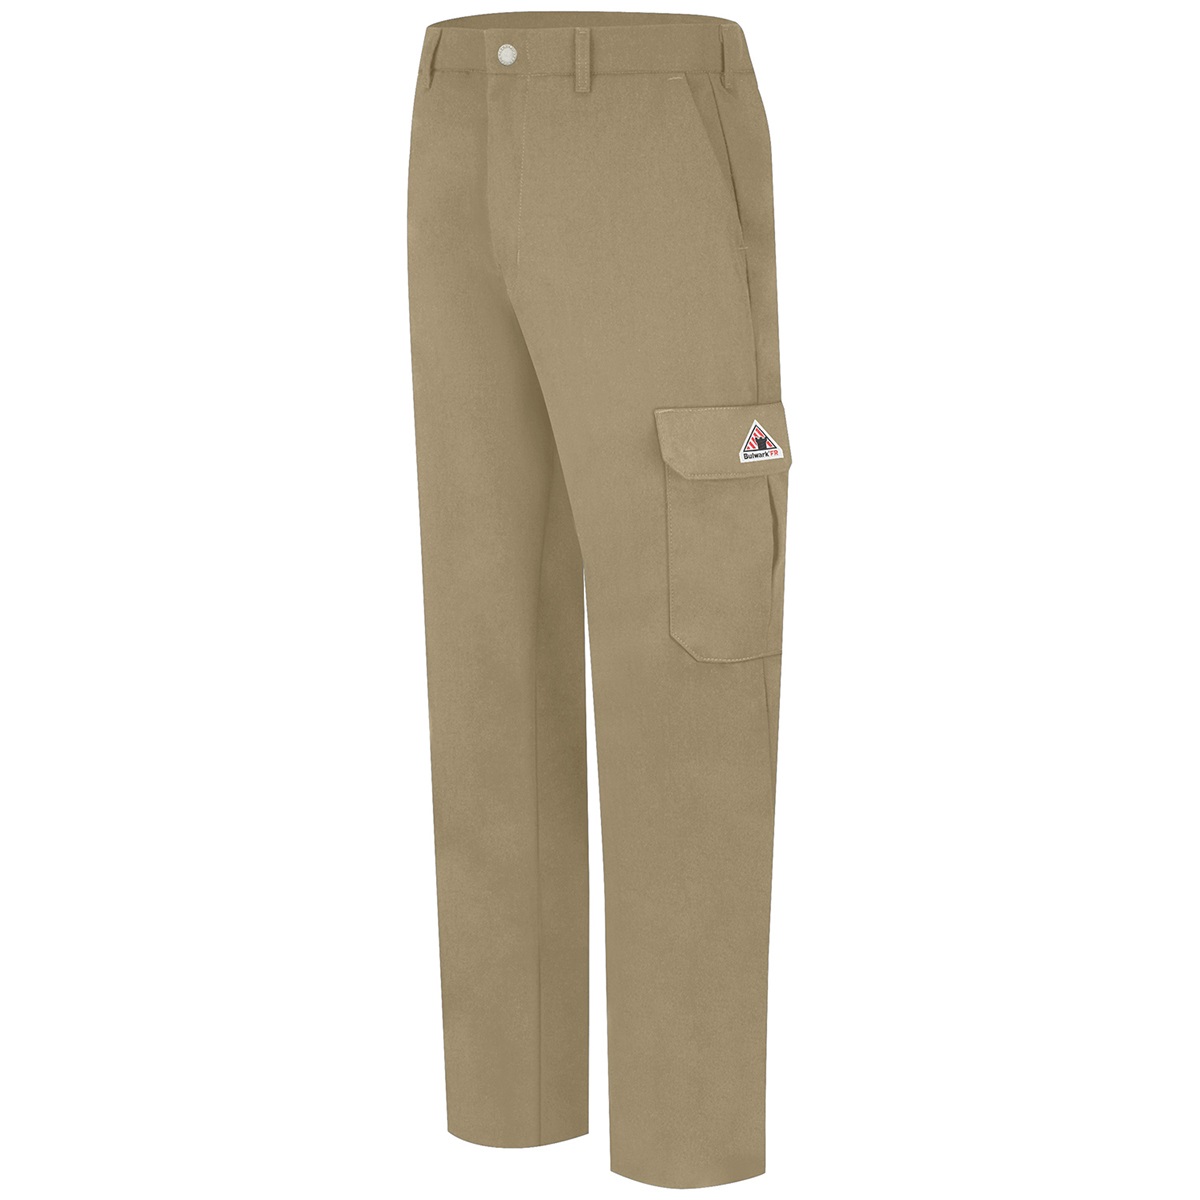 Bulwark Flame Resistant Cool Touch Cargo Pants in Khaki